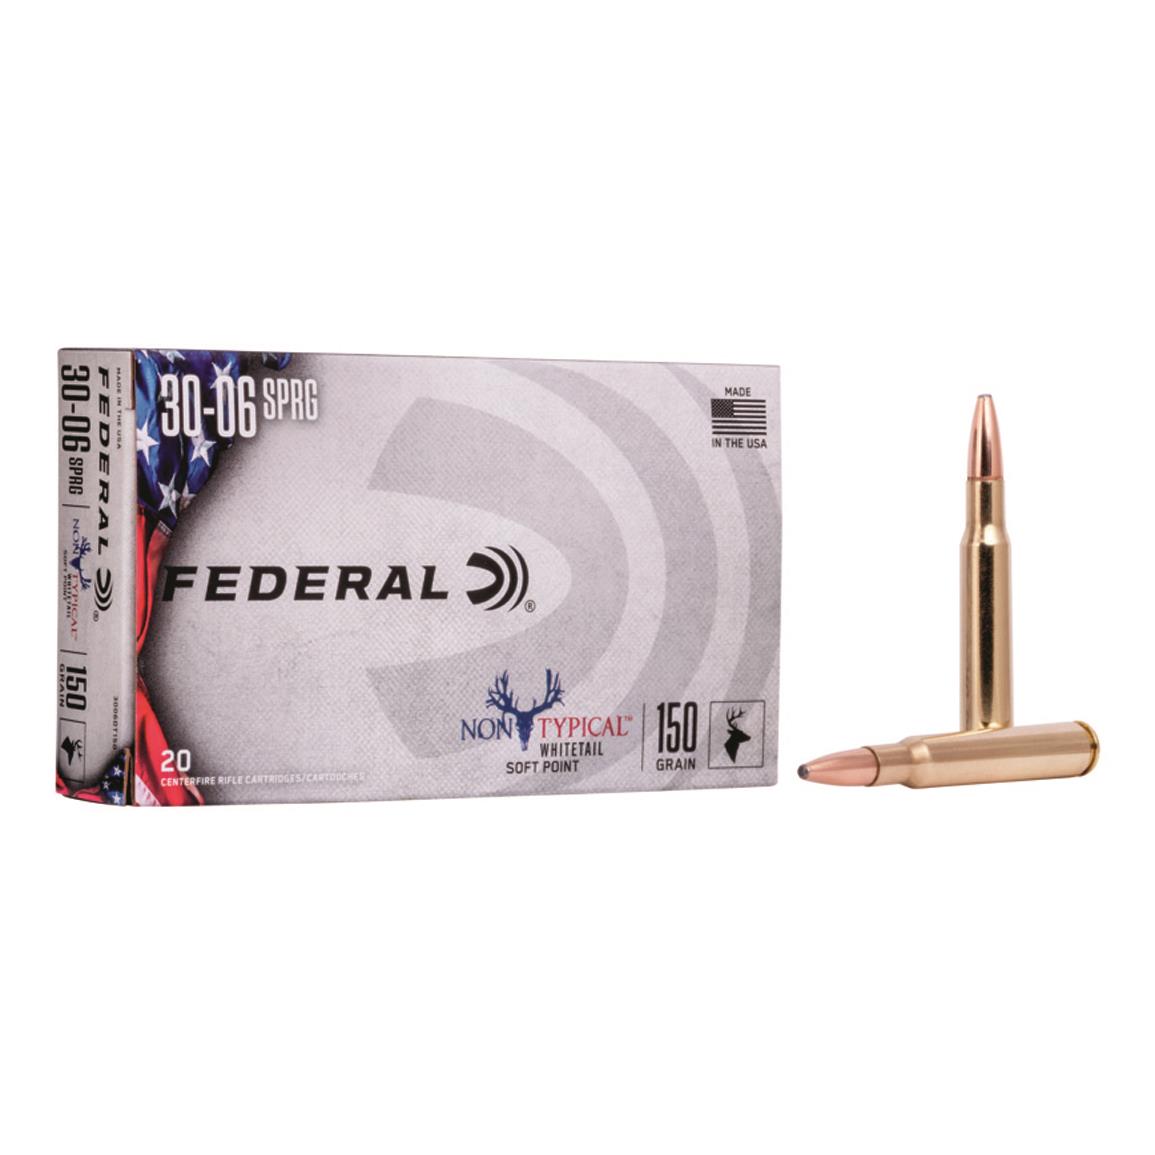 Federal, Non-Typical, .30-06 Springfield, SP, 150 Grain, 20 Rounds